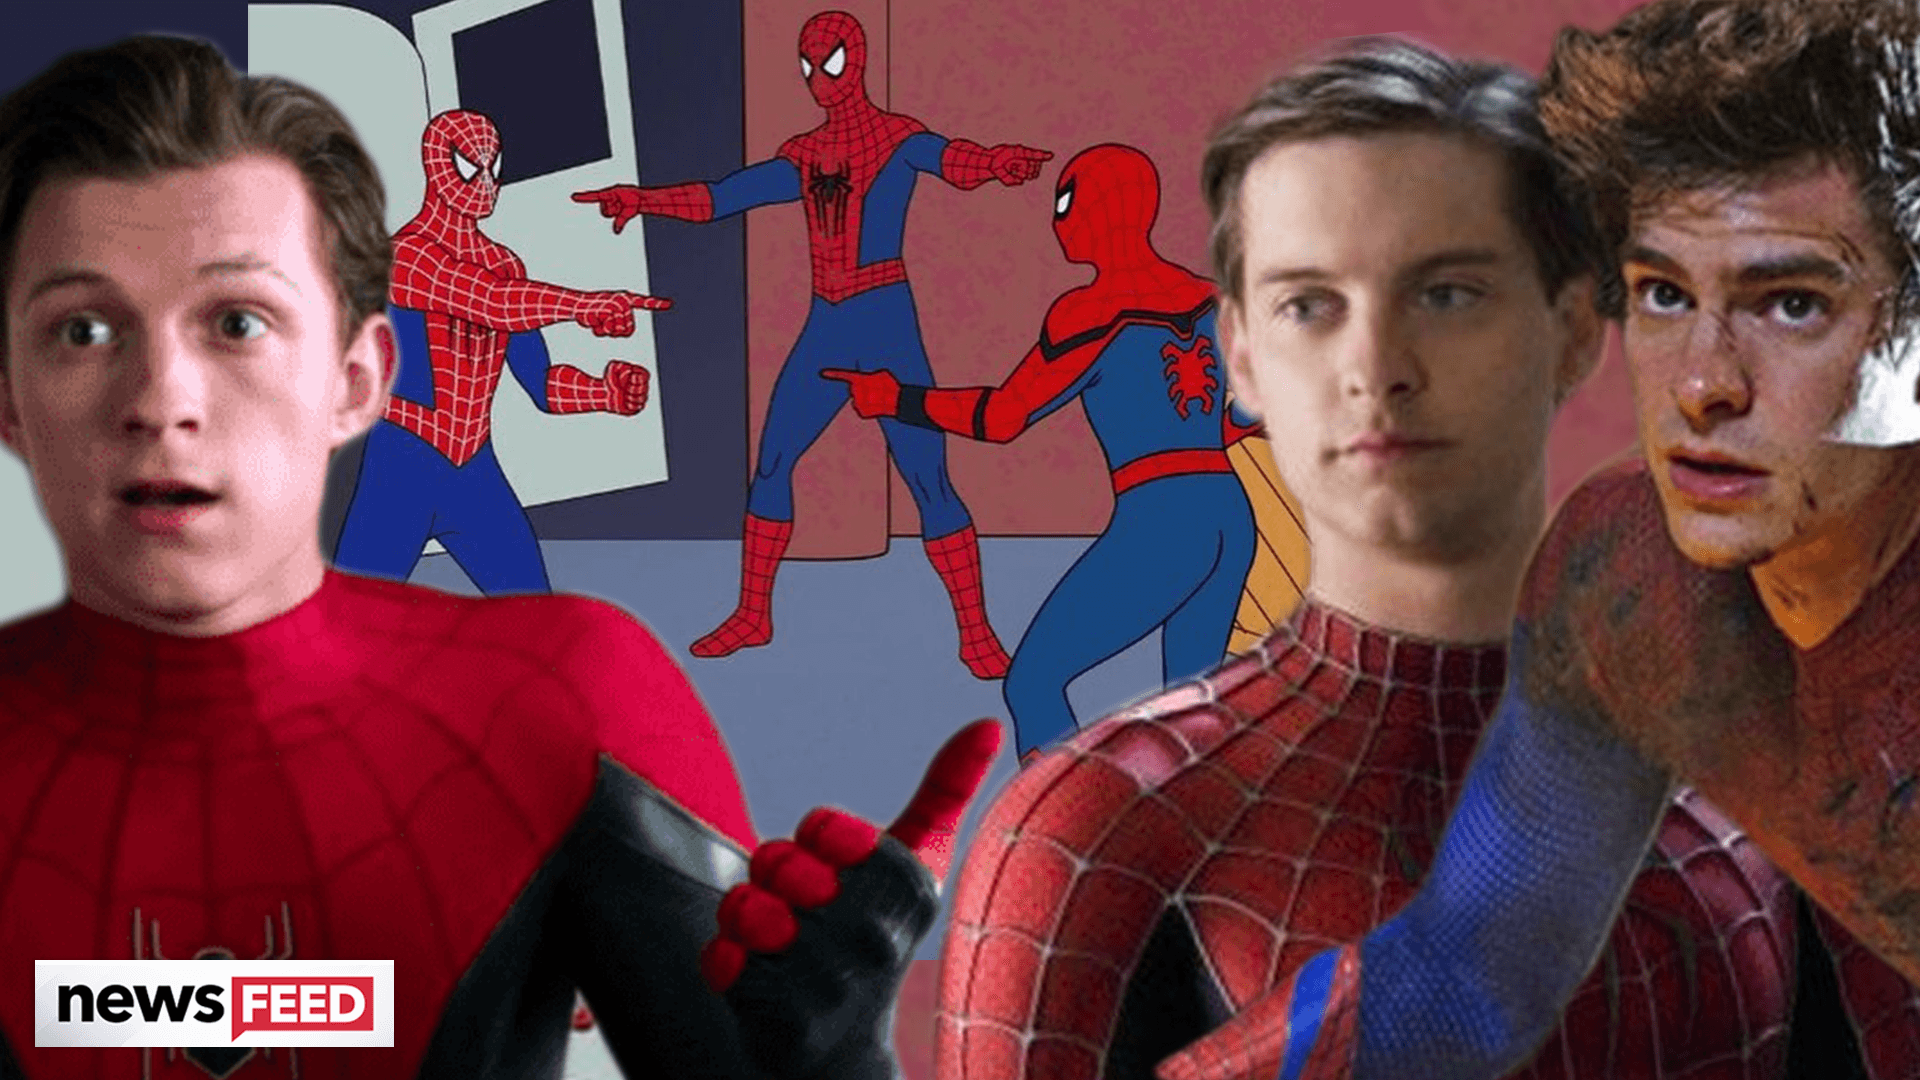 Every Spider-man Movie Explained